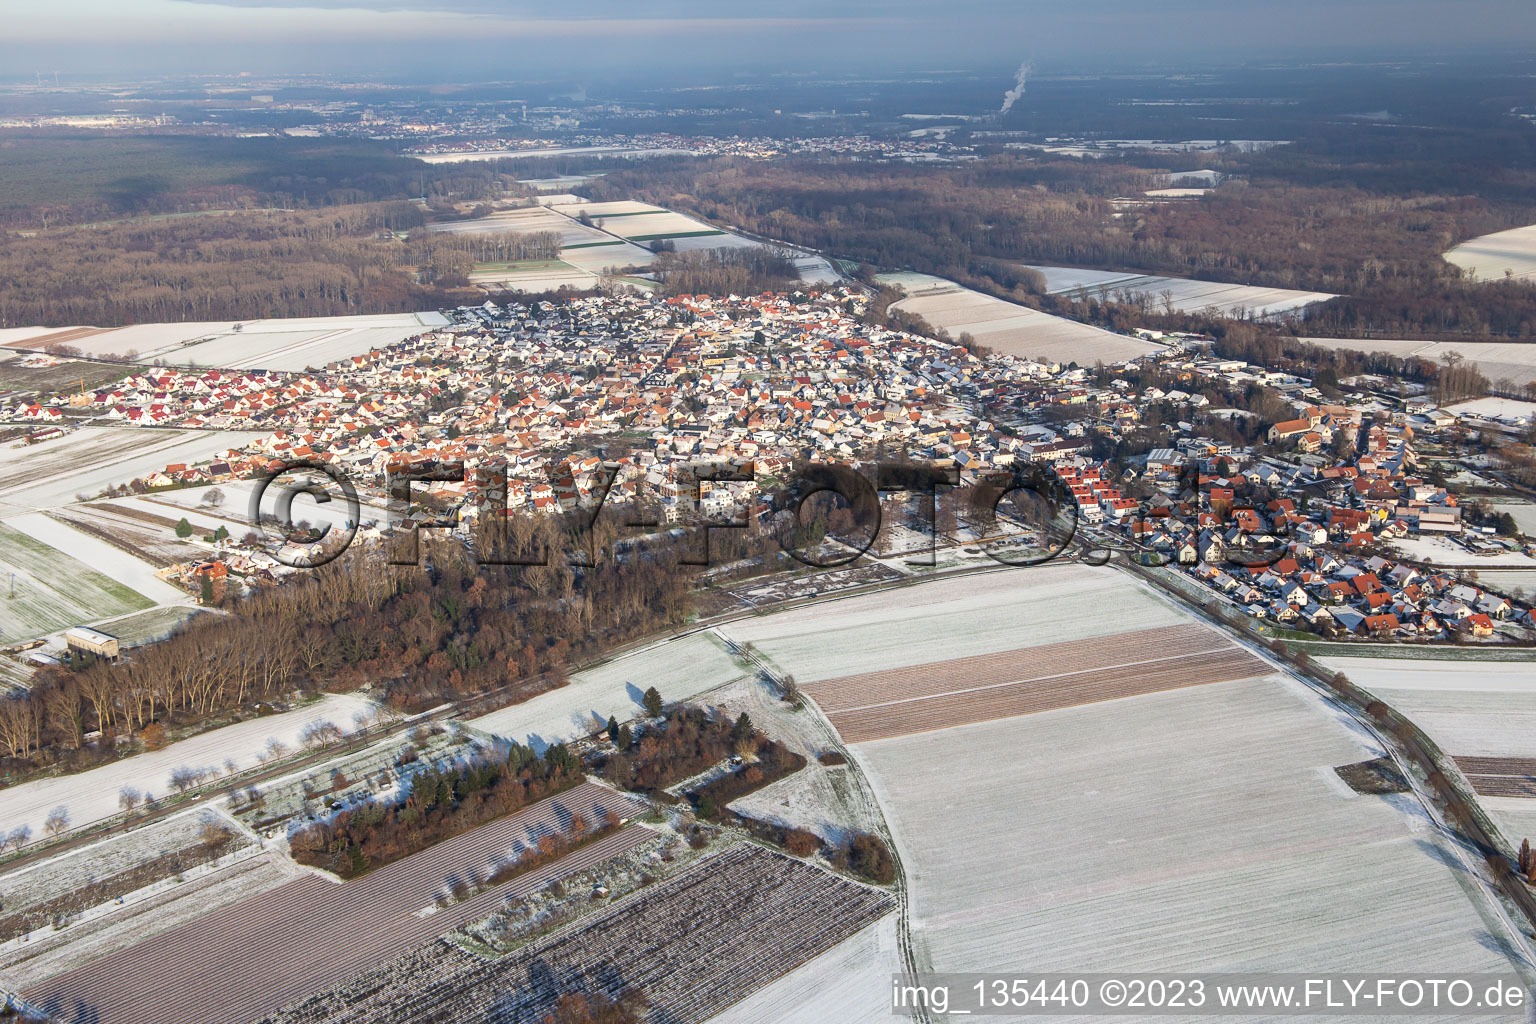 Aerial view of In winter when there is snow in Hördt in the state Rhineland-Palatinate, Germany